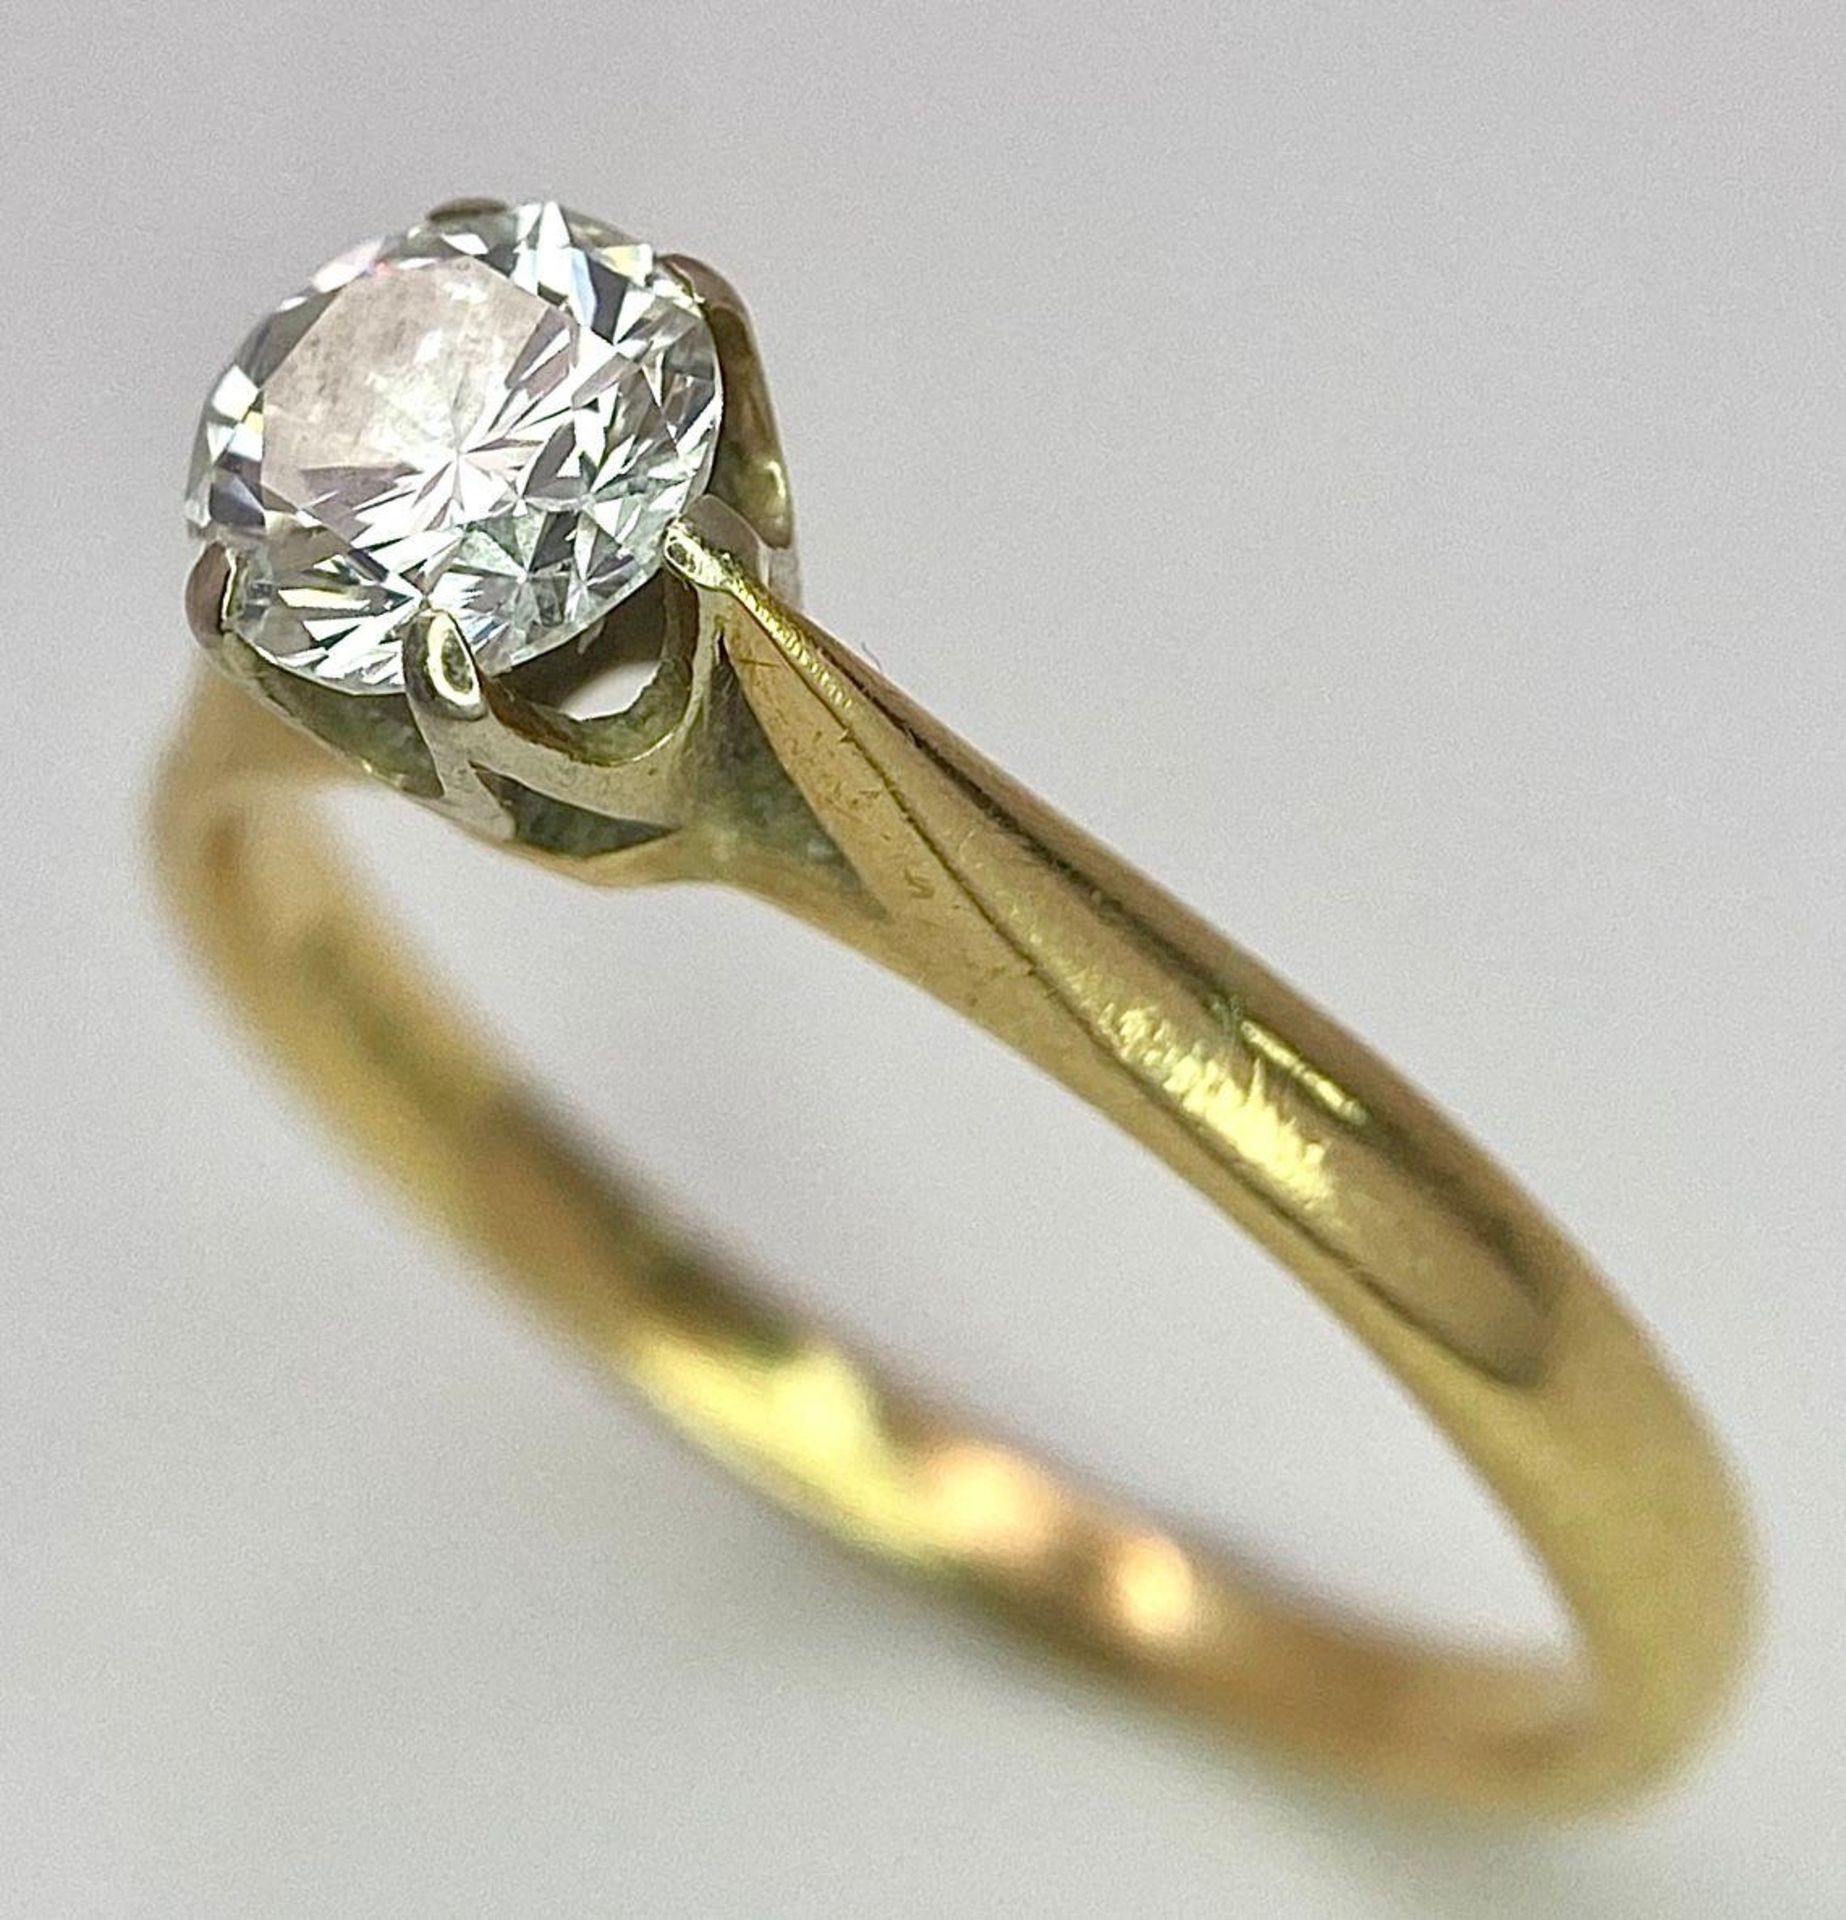 An 18K Yellow Gold Diamond Solitaire Ring. 0.75ct brilliant round cut diamond. Size N. 2.65g total - Image 2 of 6